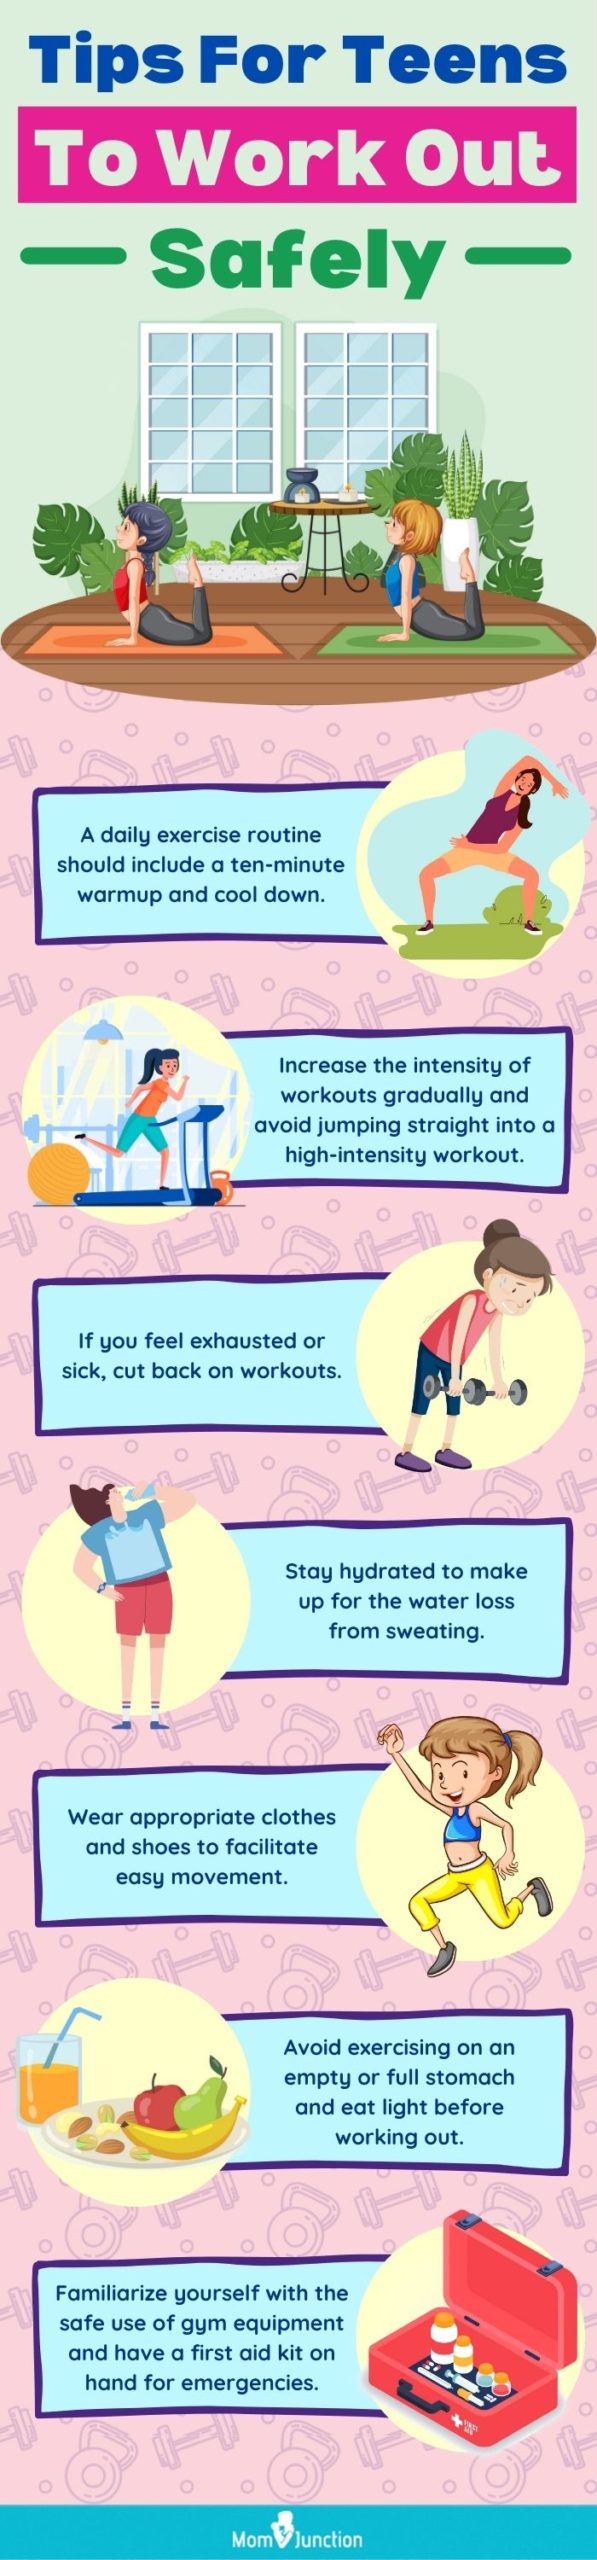 tips for teens to work out safely (infographic)